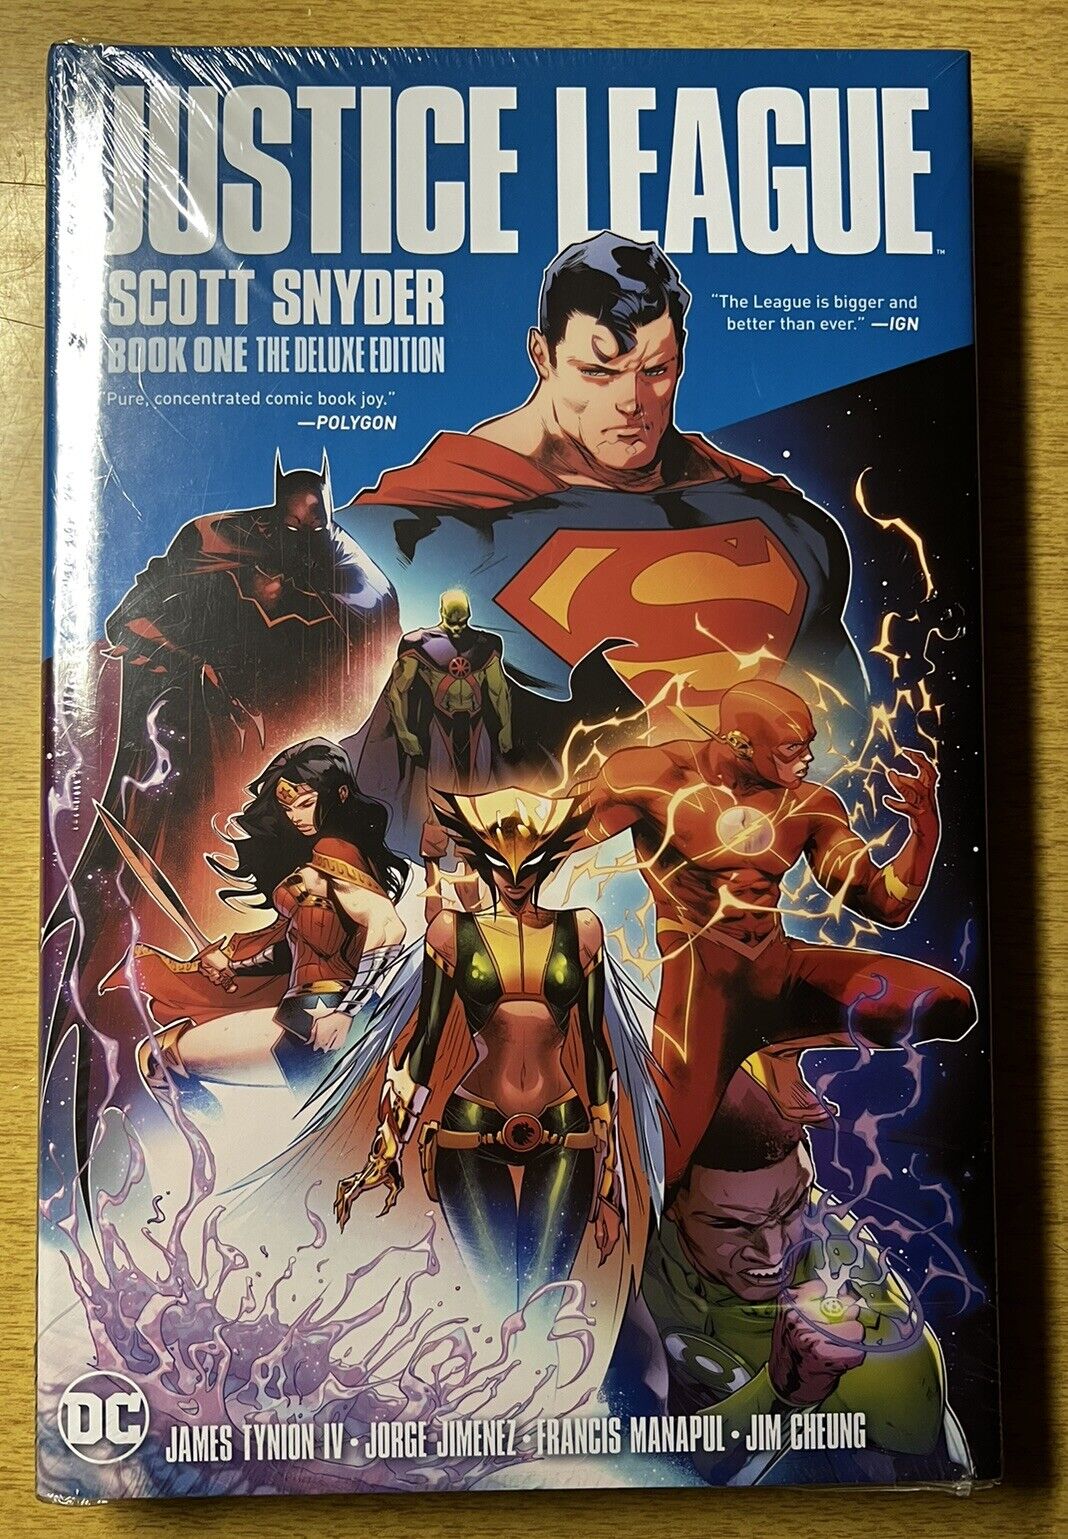 DC Justice League by Scott Snyder the Deluxe Edition #1 - Brand New Sealed